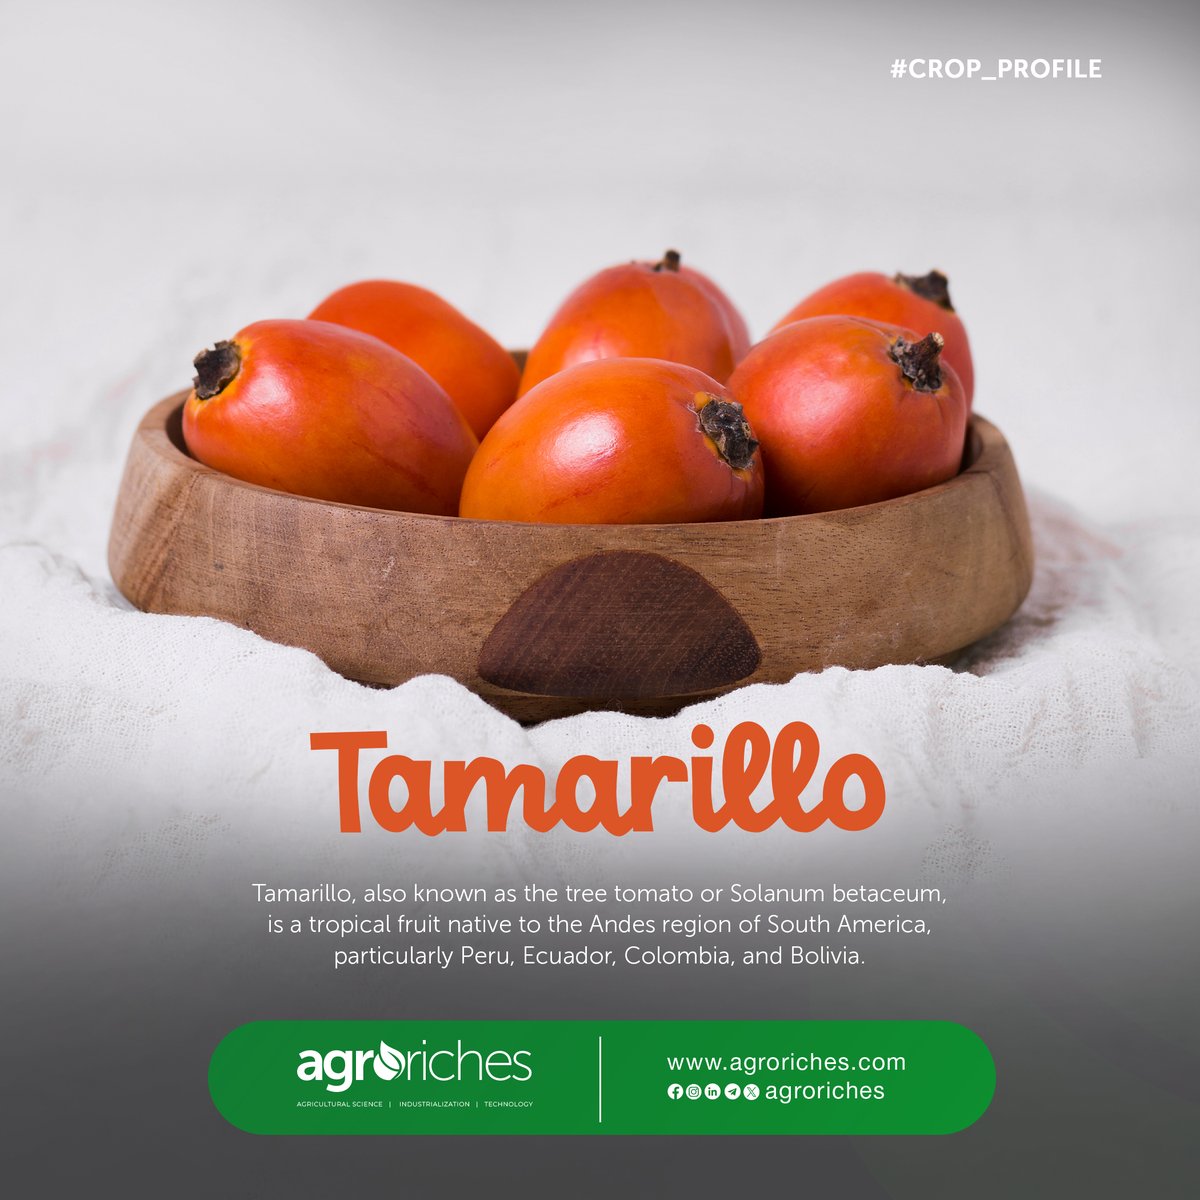 Indulge in the tantalizing taste of the Tamarillo fruit - a blend of sweet and tangy flavors in every bite!

#agroriches #agriculturaltrends #agriculturenews #african #women #agricultureinghana #ghana #articles #farming #growth #food #agriculture #technologynews